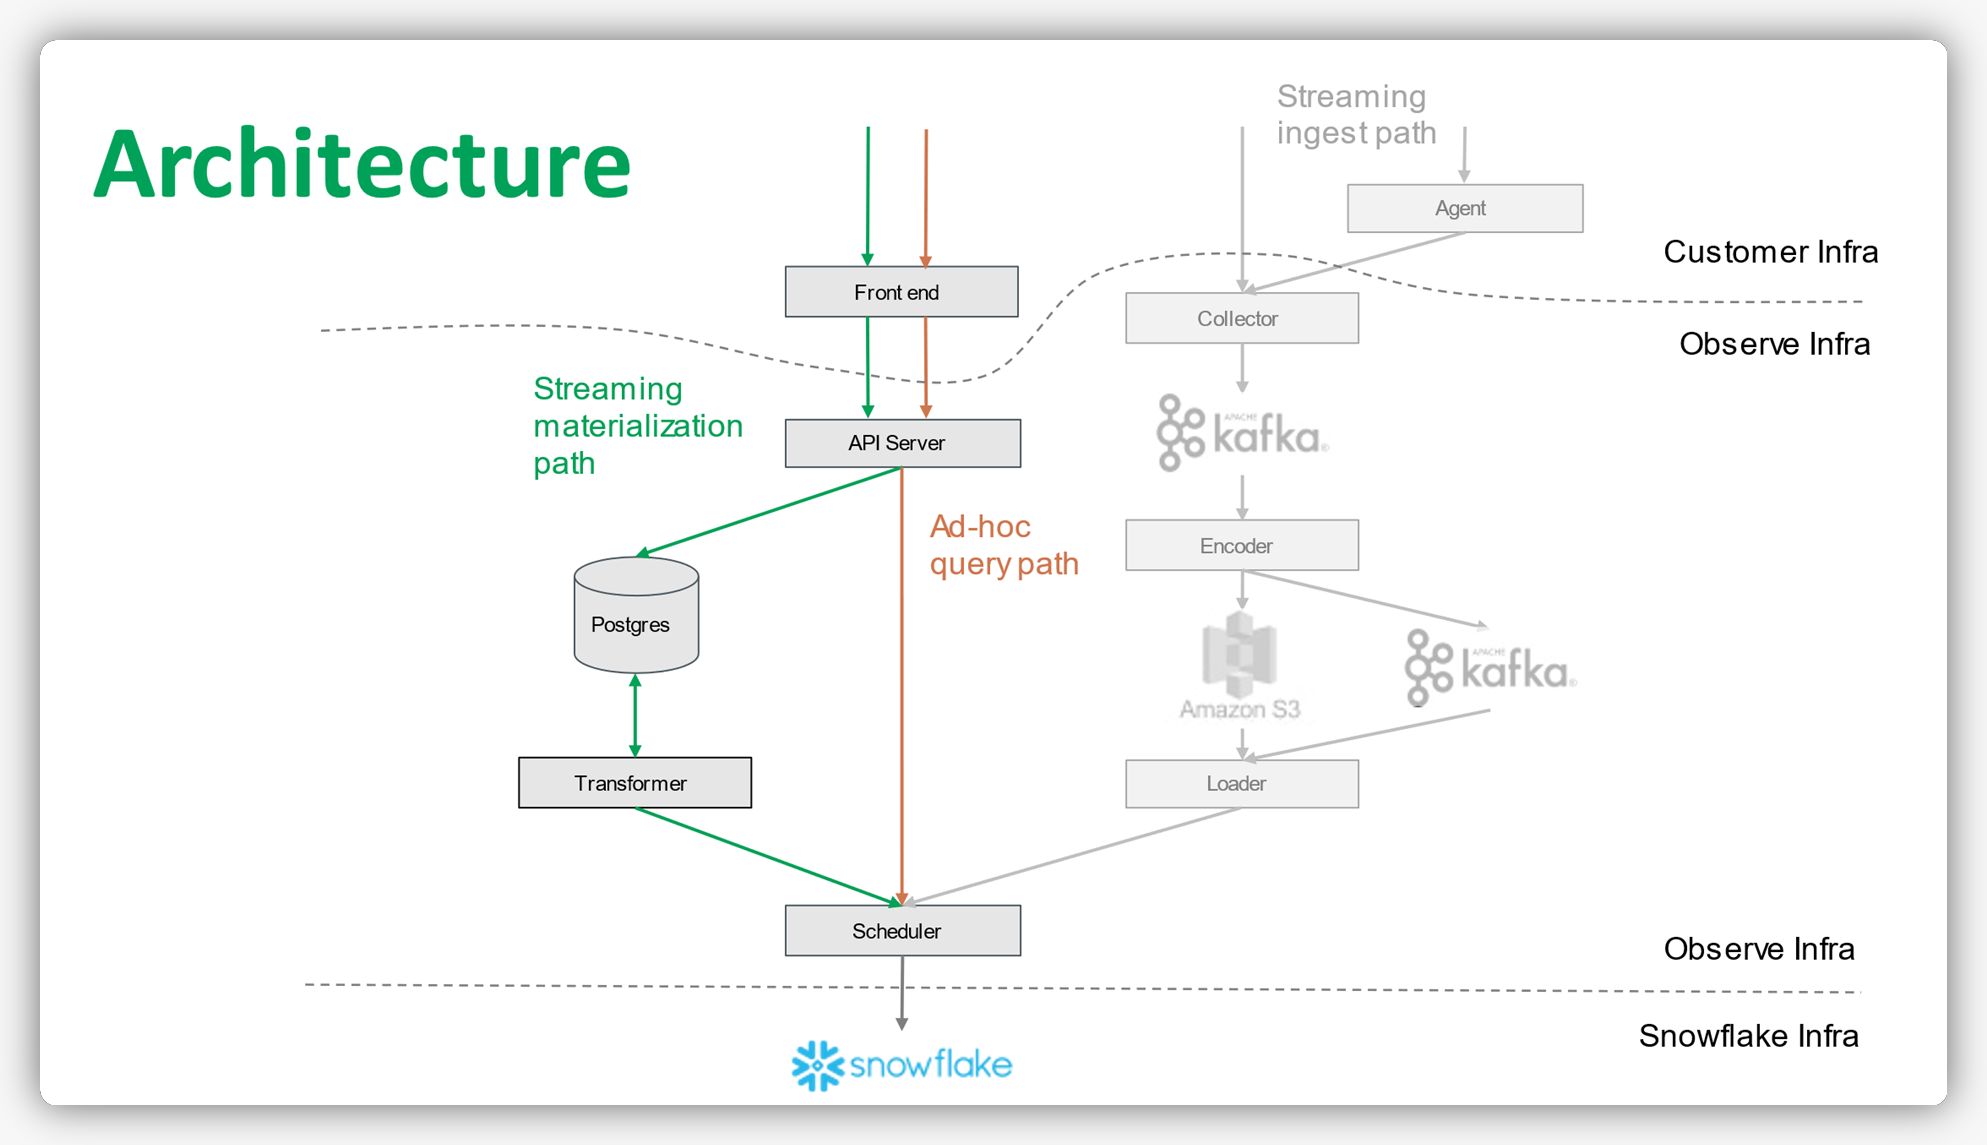 Observe streaming materialization path architecture diagram